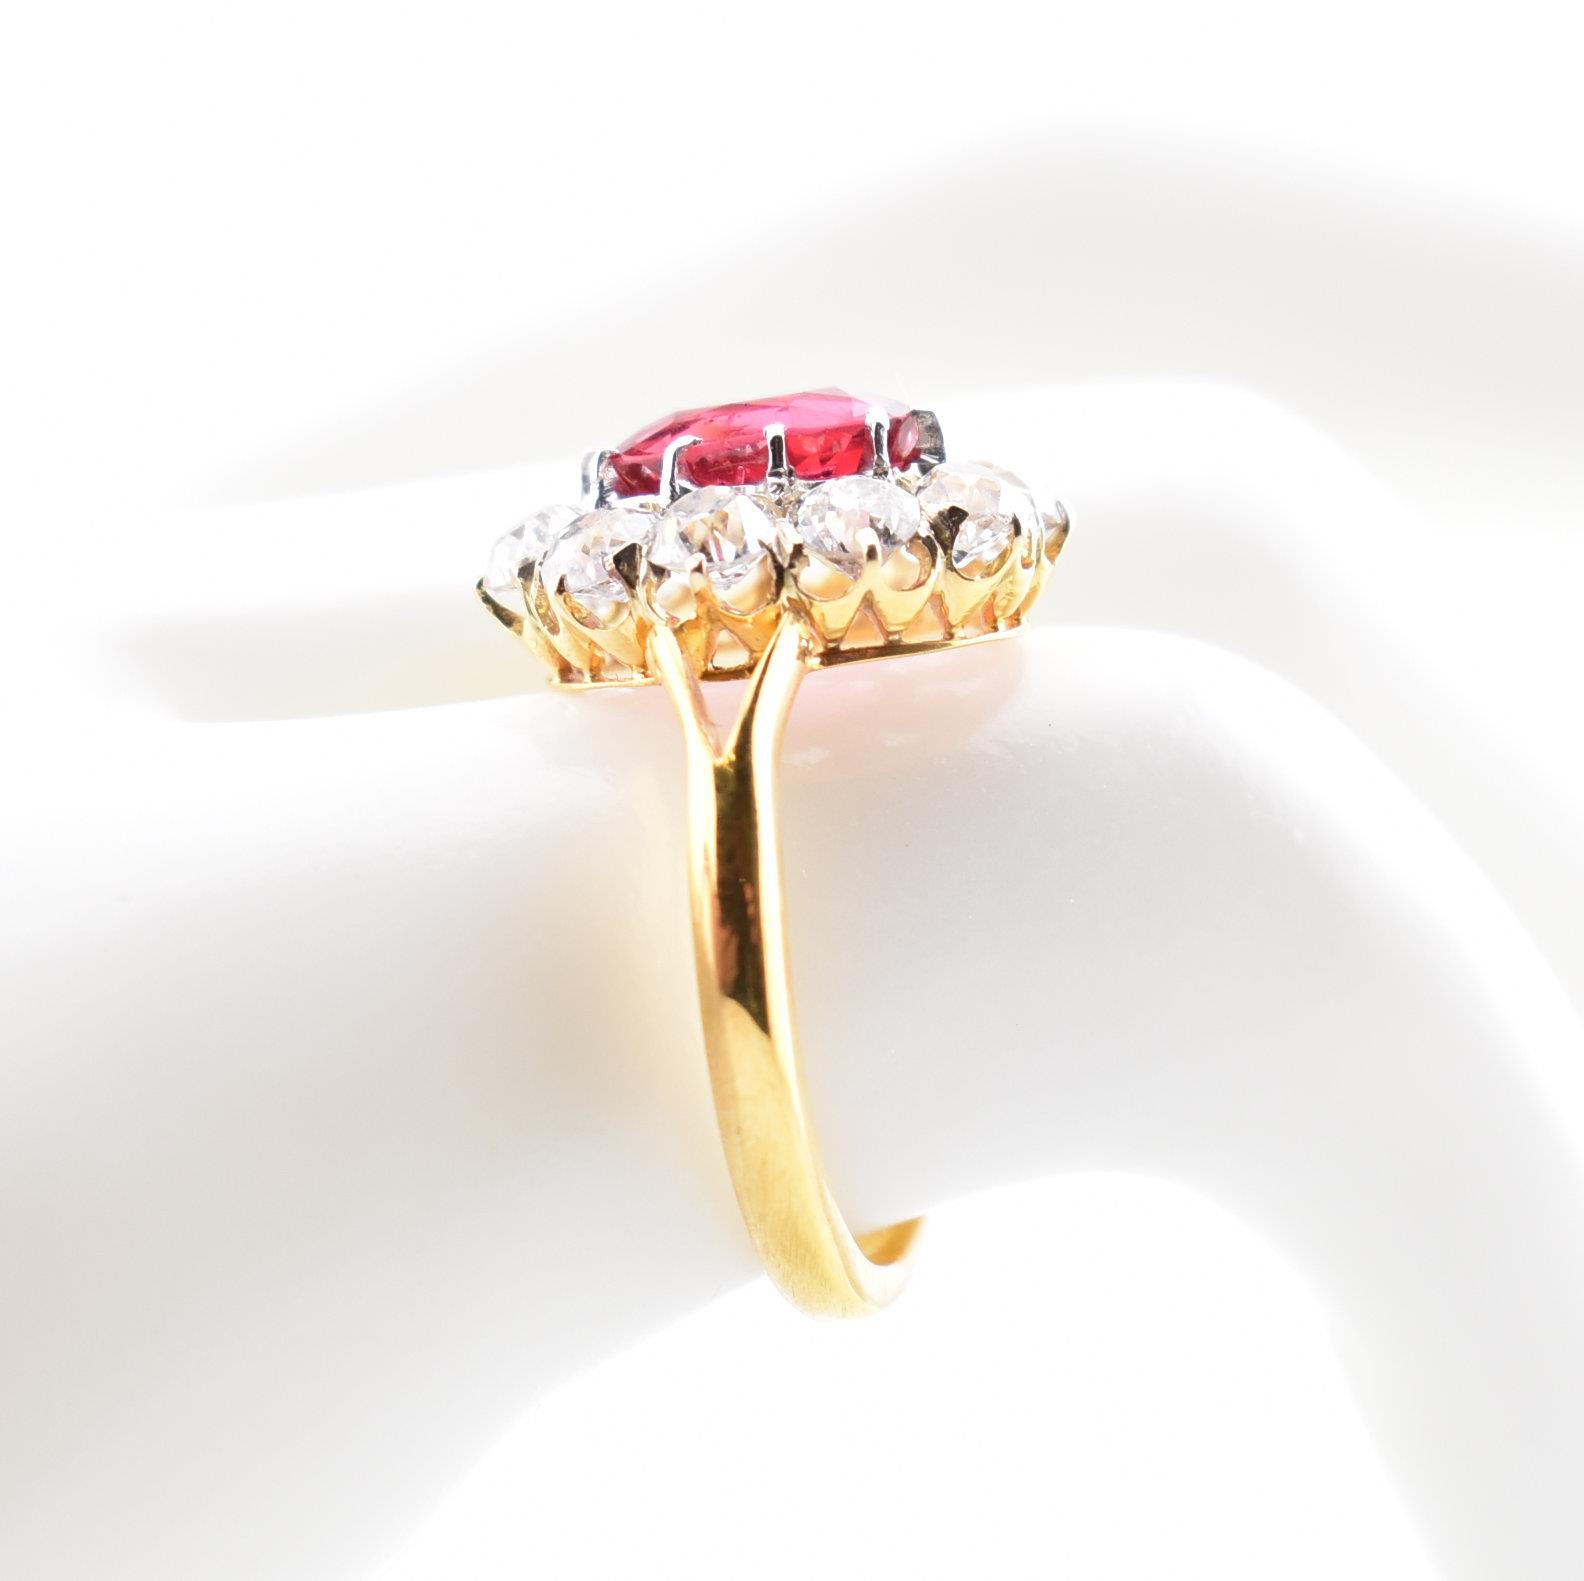 VICTORIAN RED SPINEL & DIAMOND CLUSTER RING - Image 8 of 8